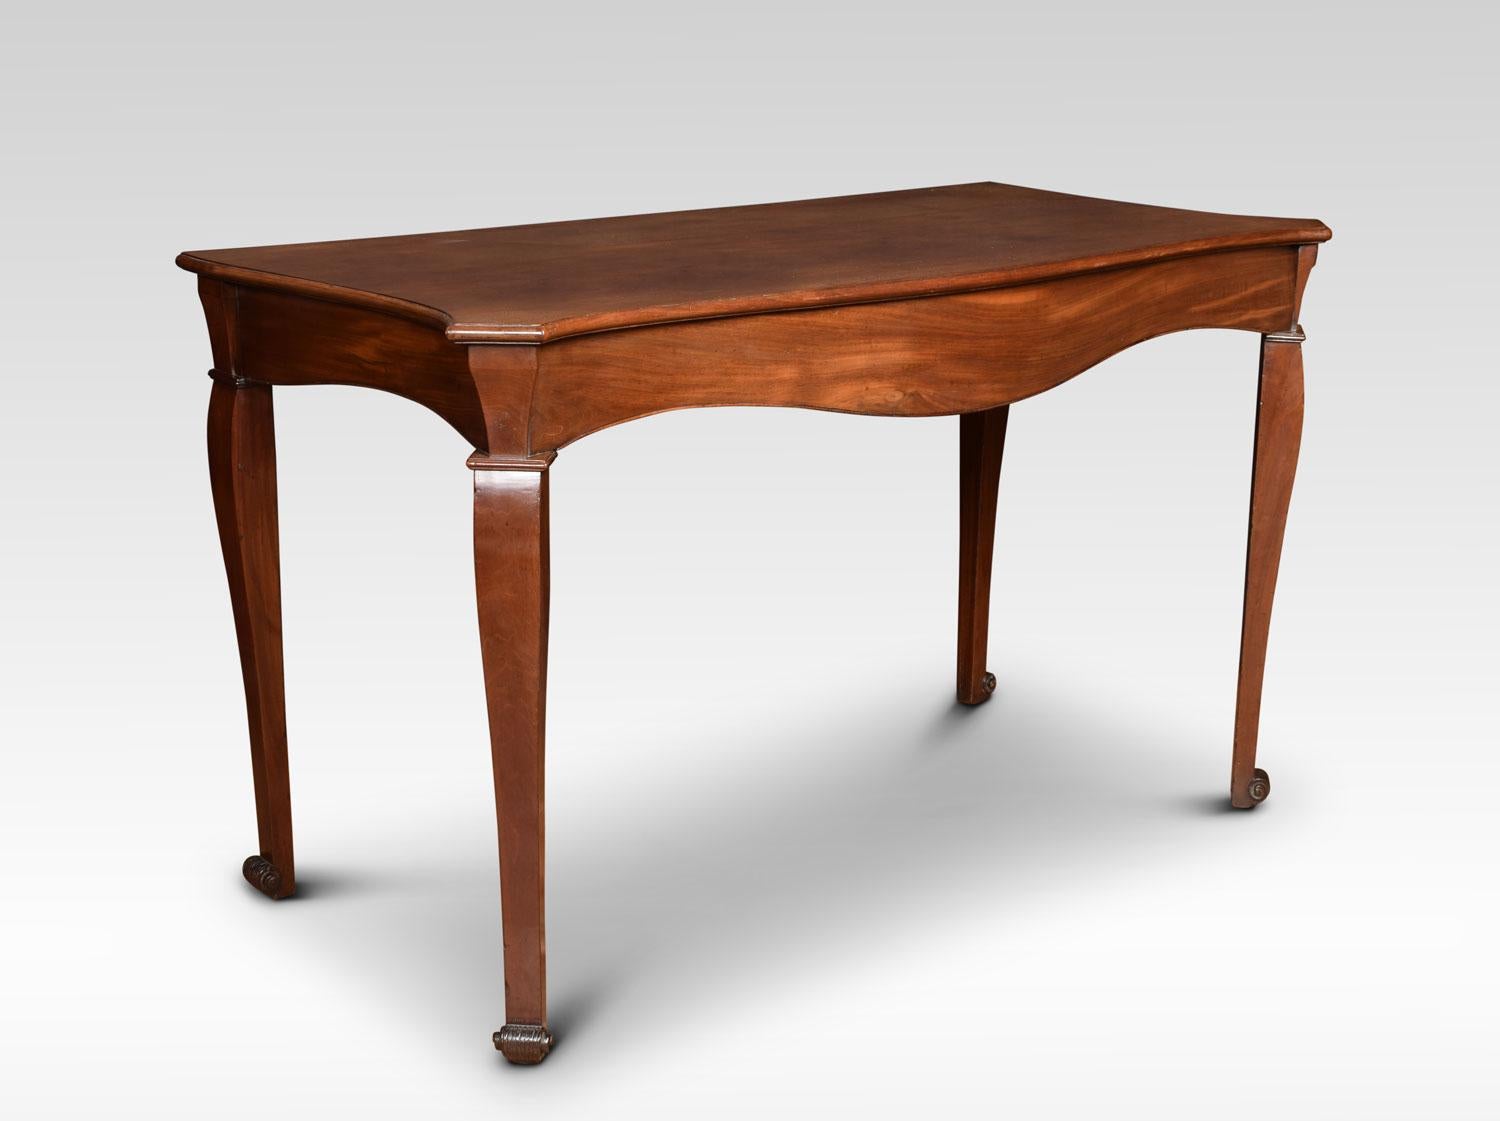 George III serving table, the large mahogany serpentine fronted top above shaped freeze. All raised up on tapering front legs terminating in scroll feet.
Dimensions:
Height 35 inches
Width 57.5 inches
Depth 29.5 inches.